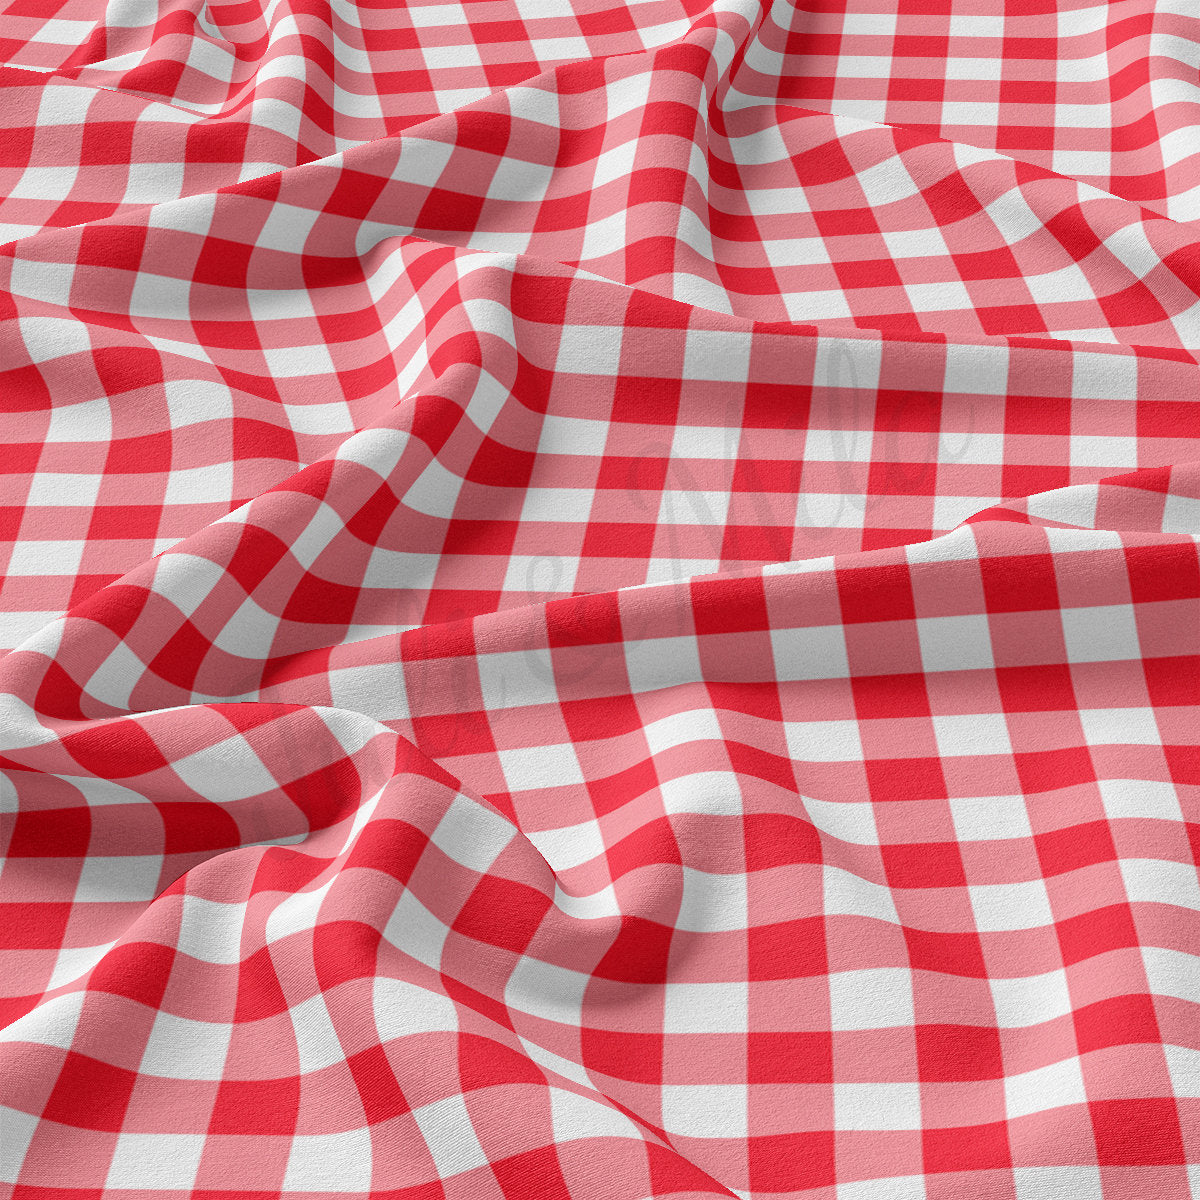 DBP Fabric Double Brushed Polyester DBP2460 Gingham